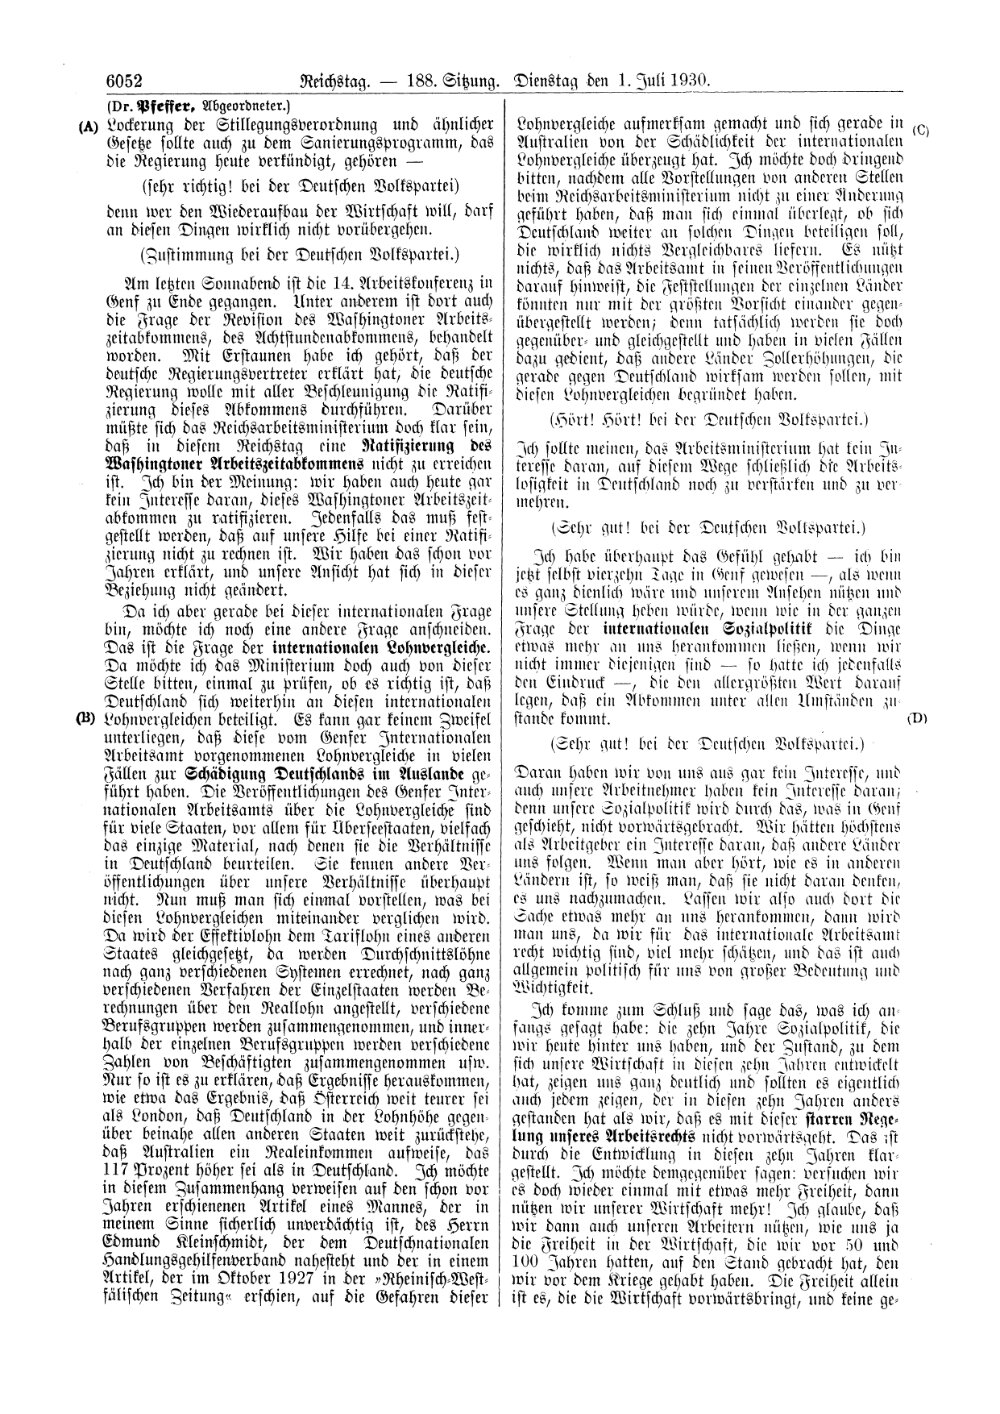 Scan of page 6052